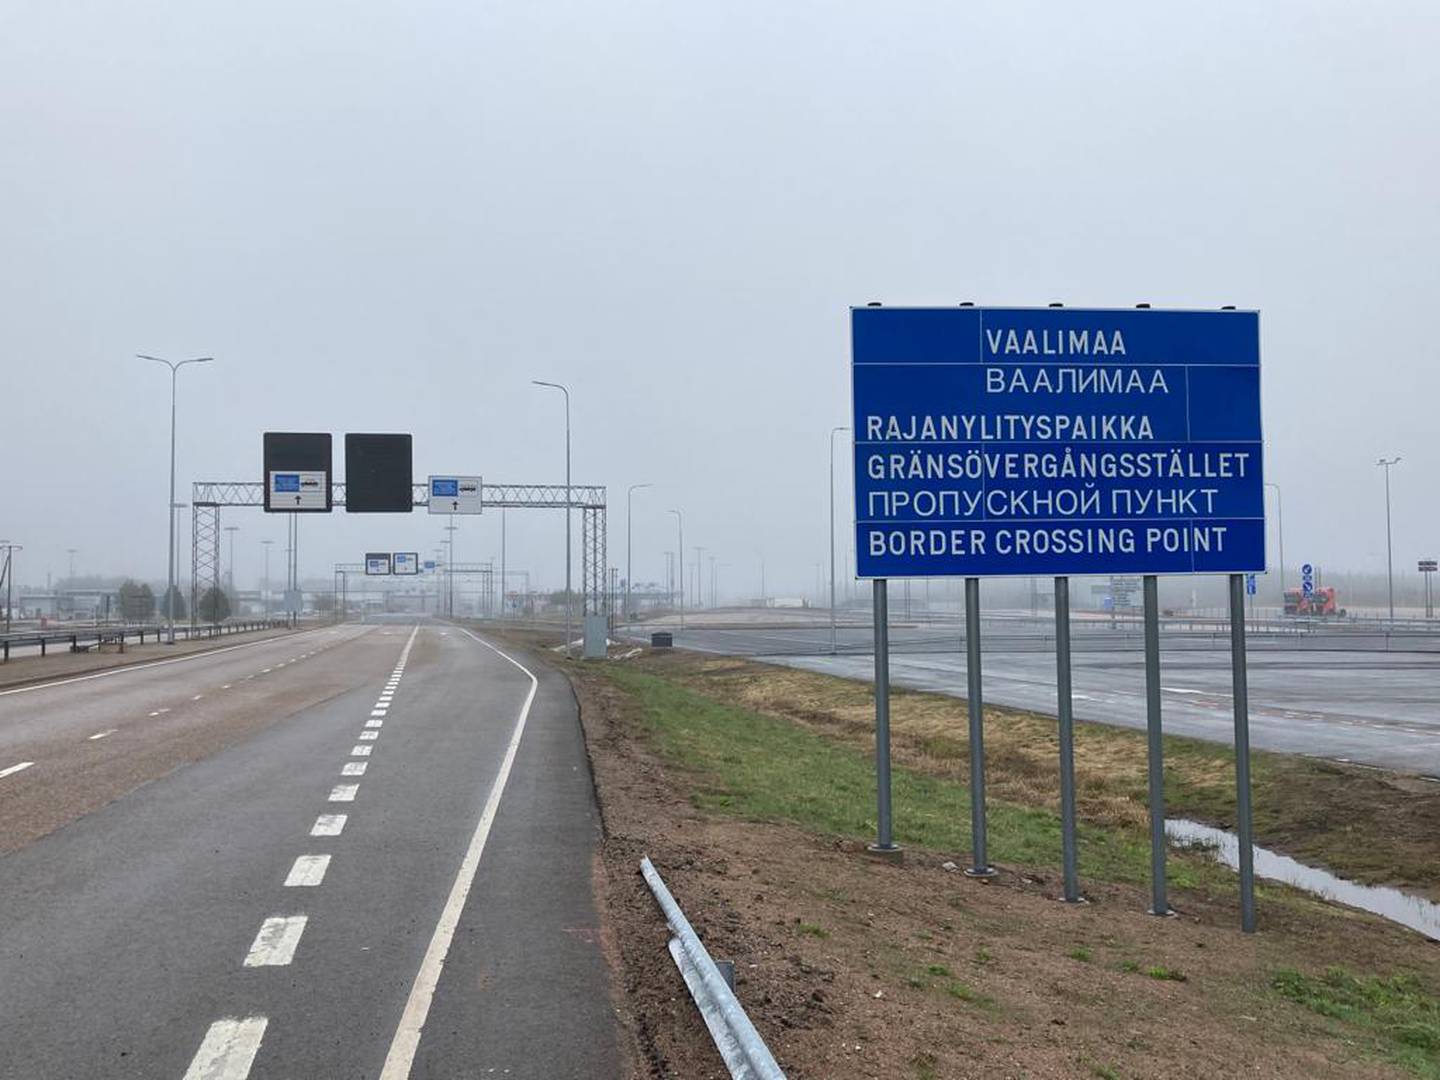 Empty roads at the Vaalimaa crossing. Thomas Harding / The National